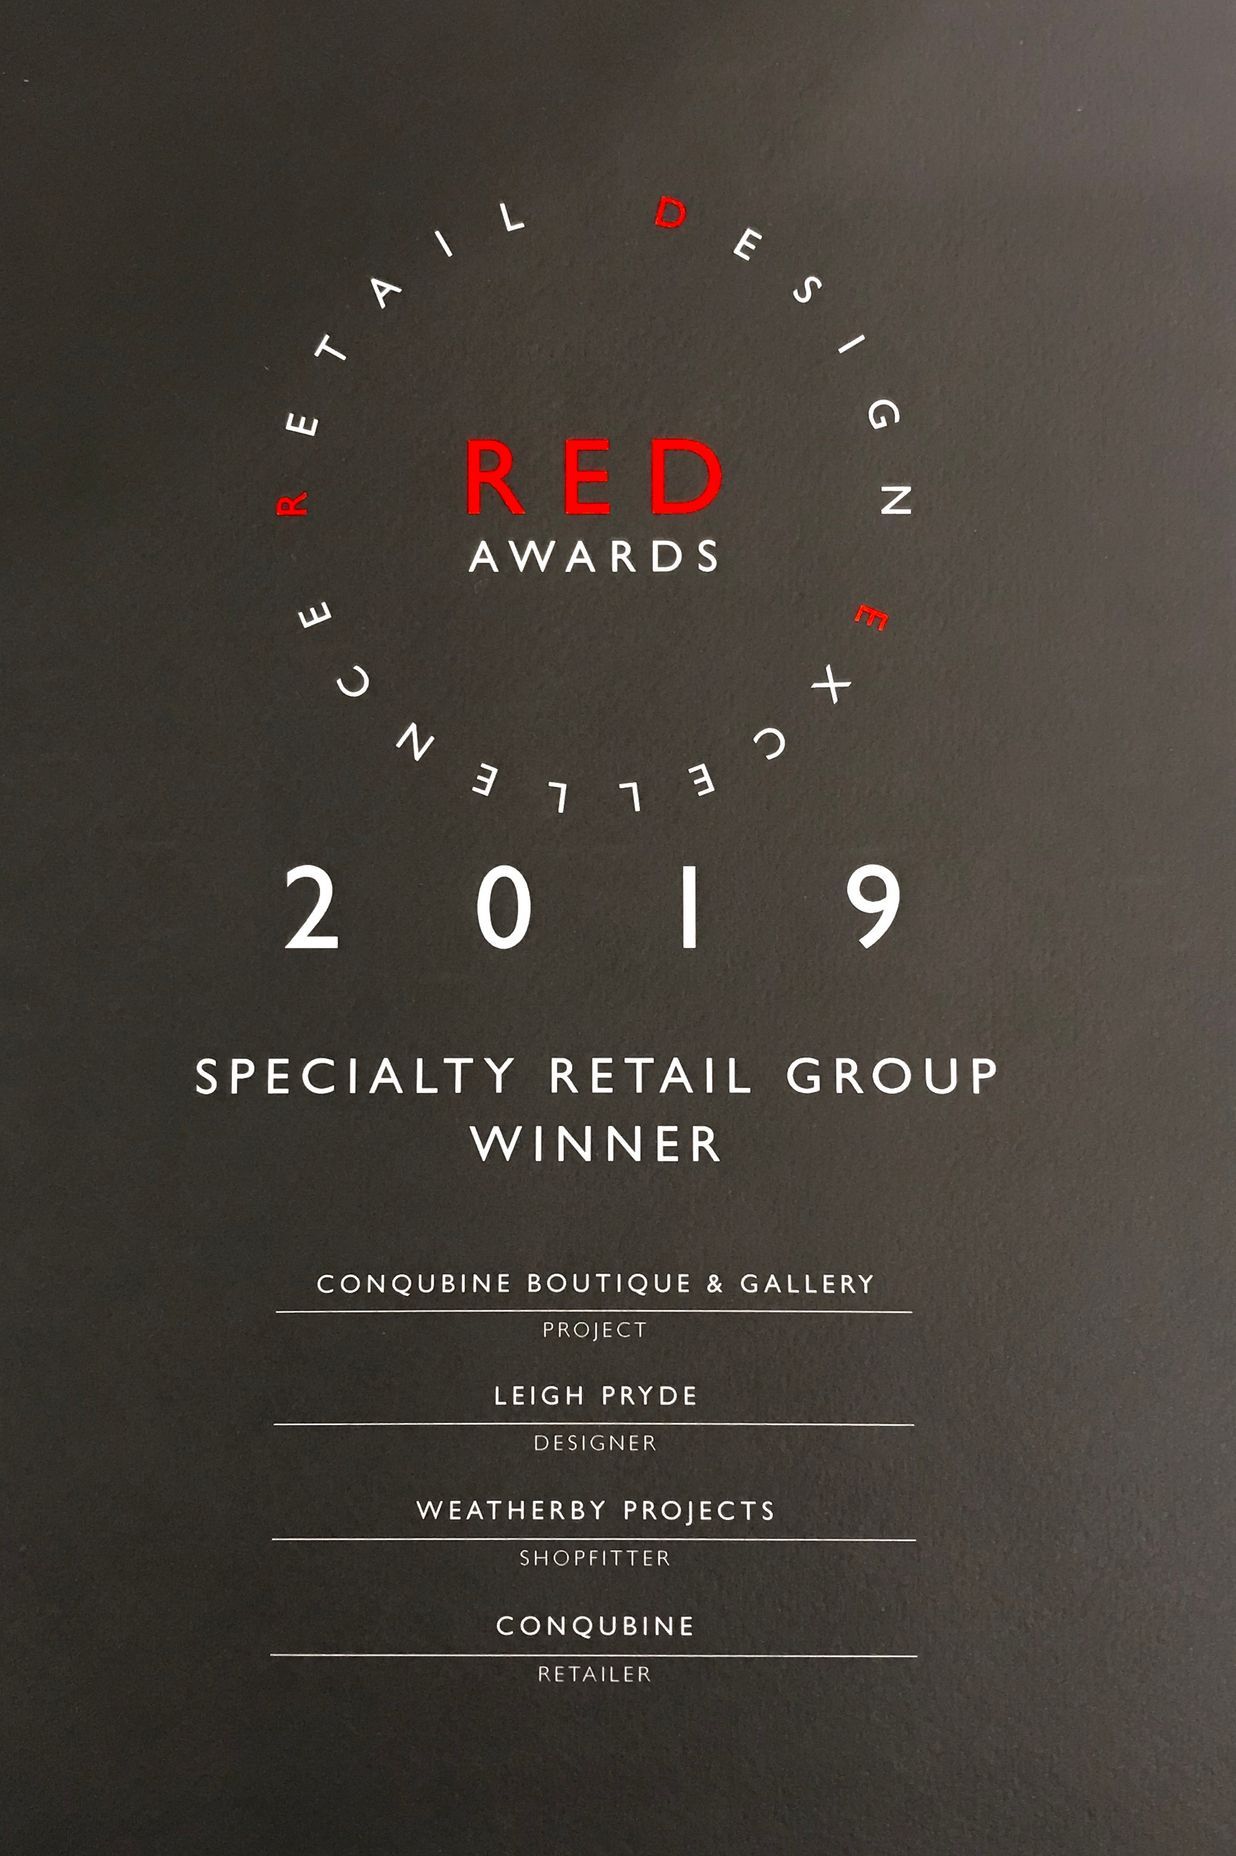 Gallery &amp; Boutique, Auckland, New Zealand -  Winner Speciality Retail  | RED Design Awards 2019